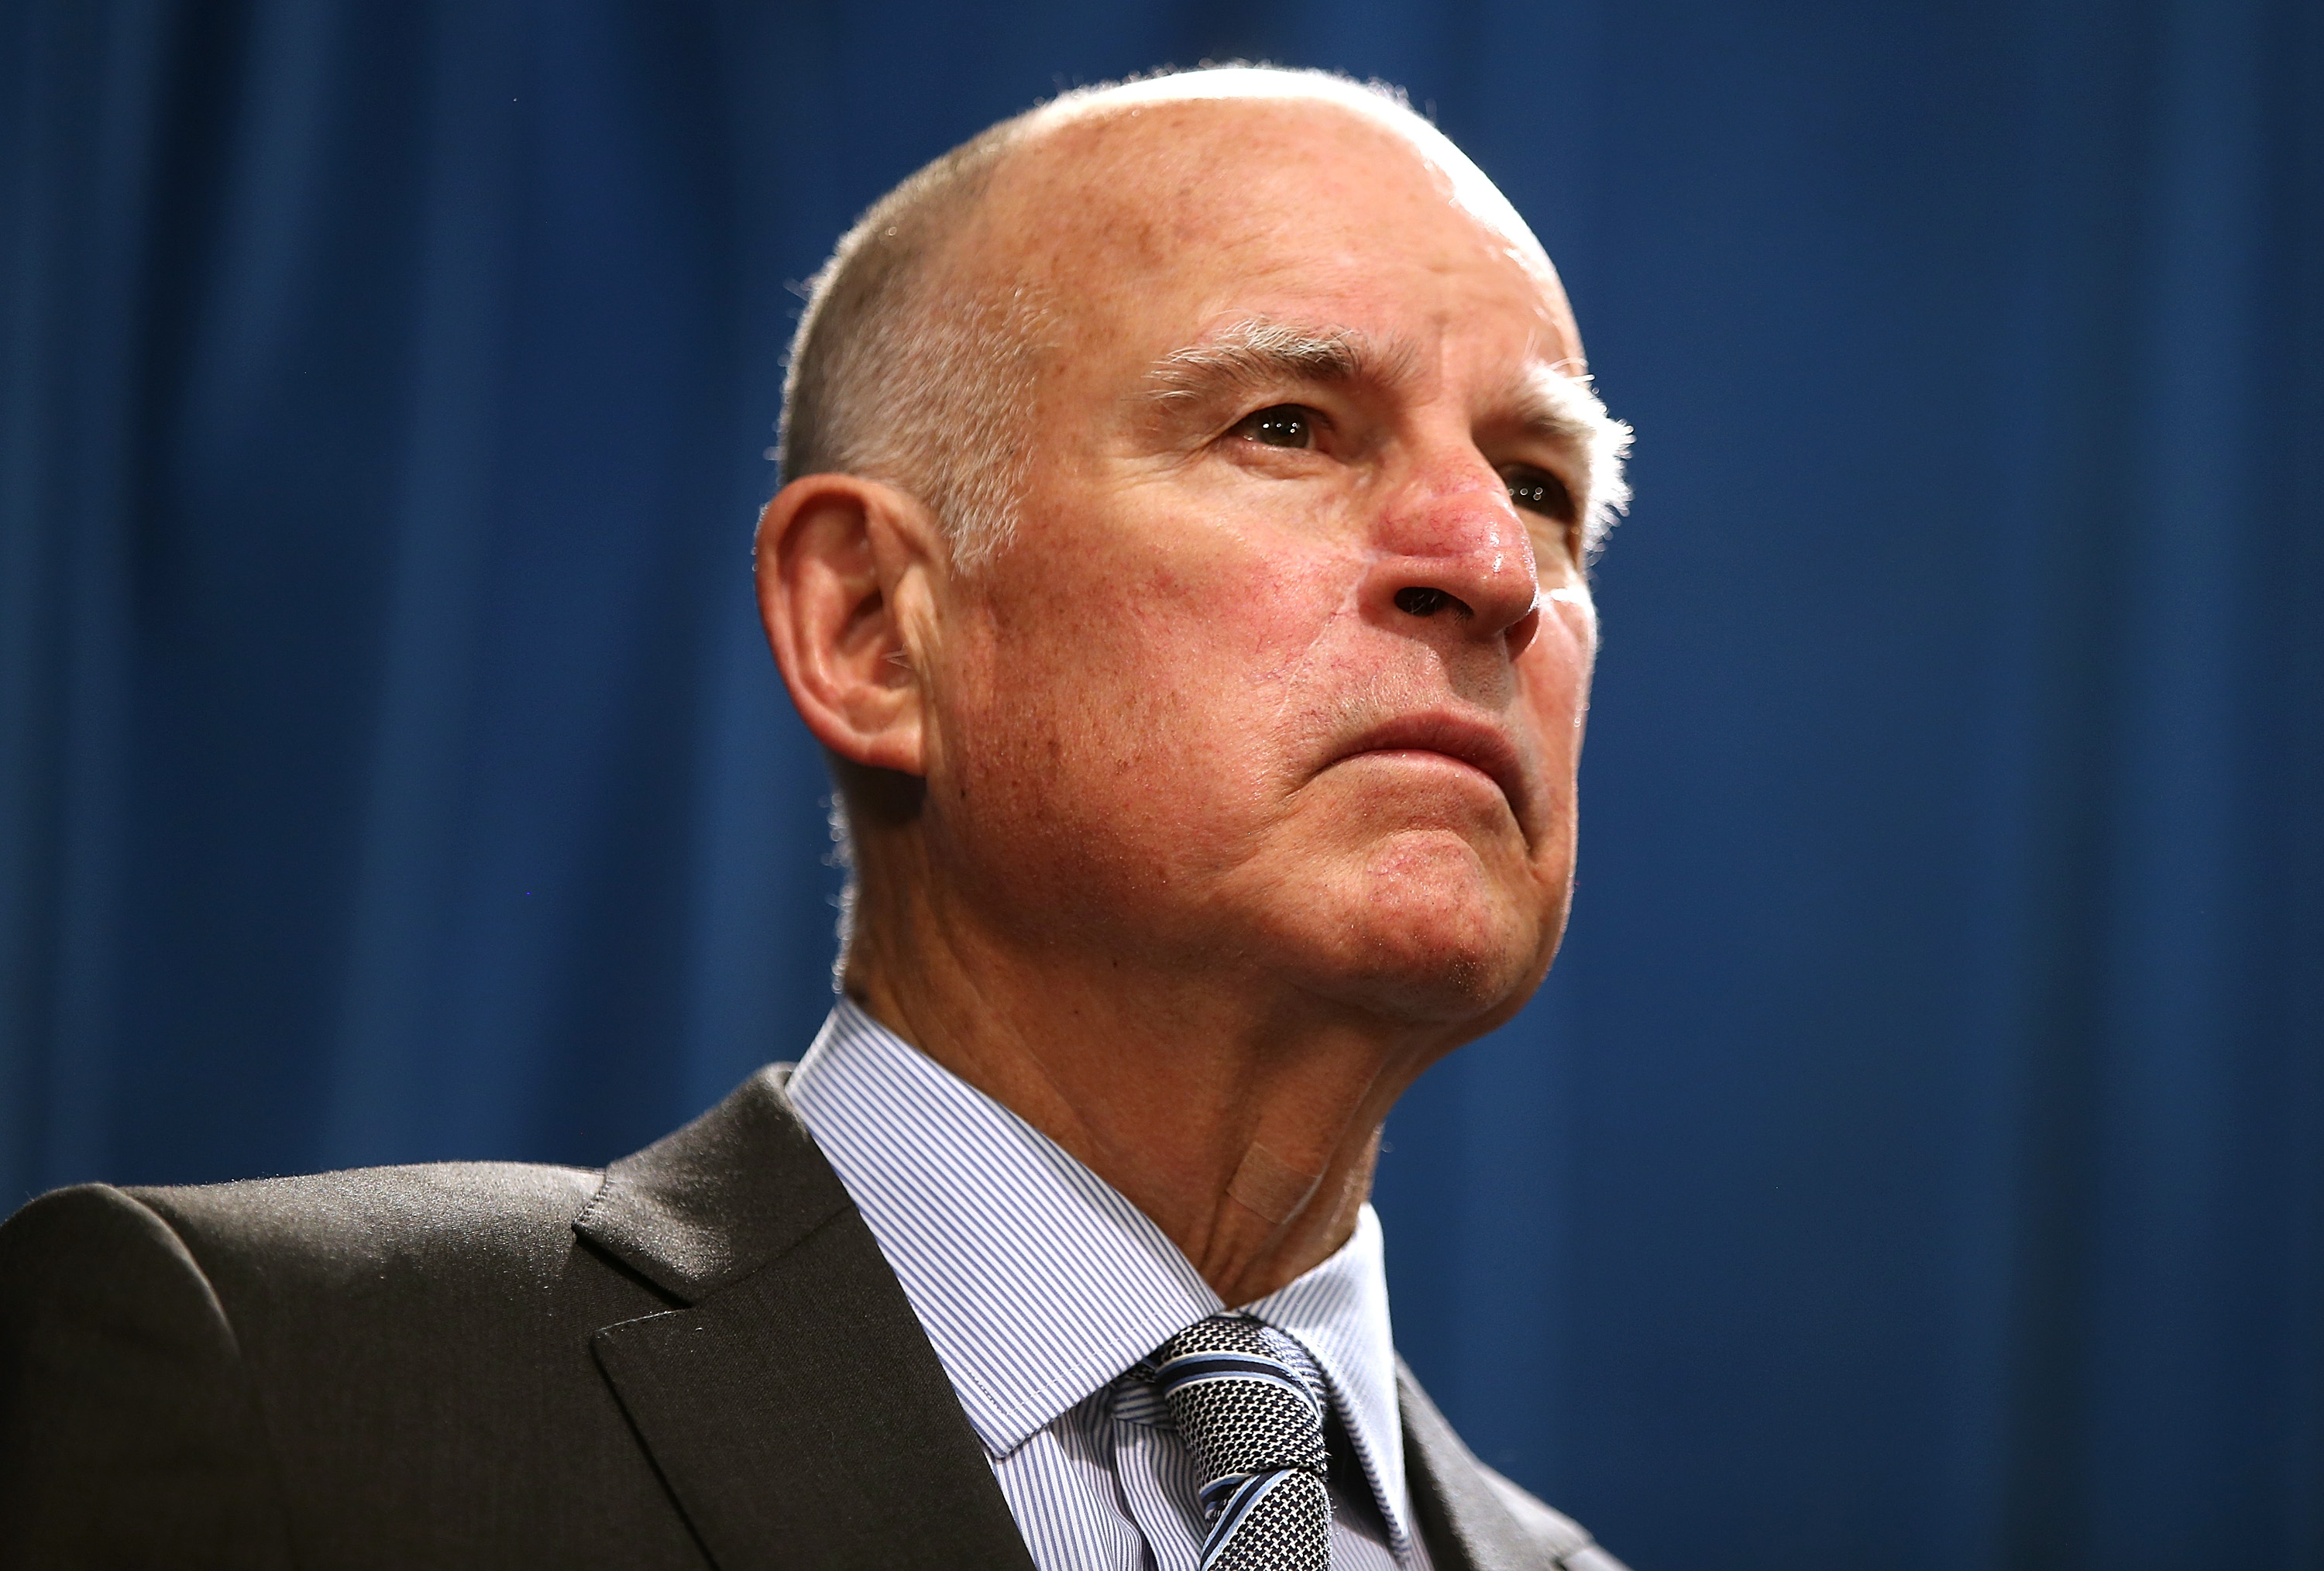 California Governor Jerry Brown speaks during a news conference to announce emergency drought legislation on March 19, 2015, in Sacramento, Calif. (Justin Sullivan—Getty Images)